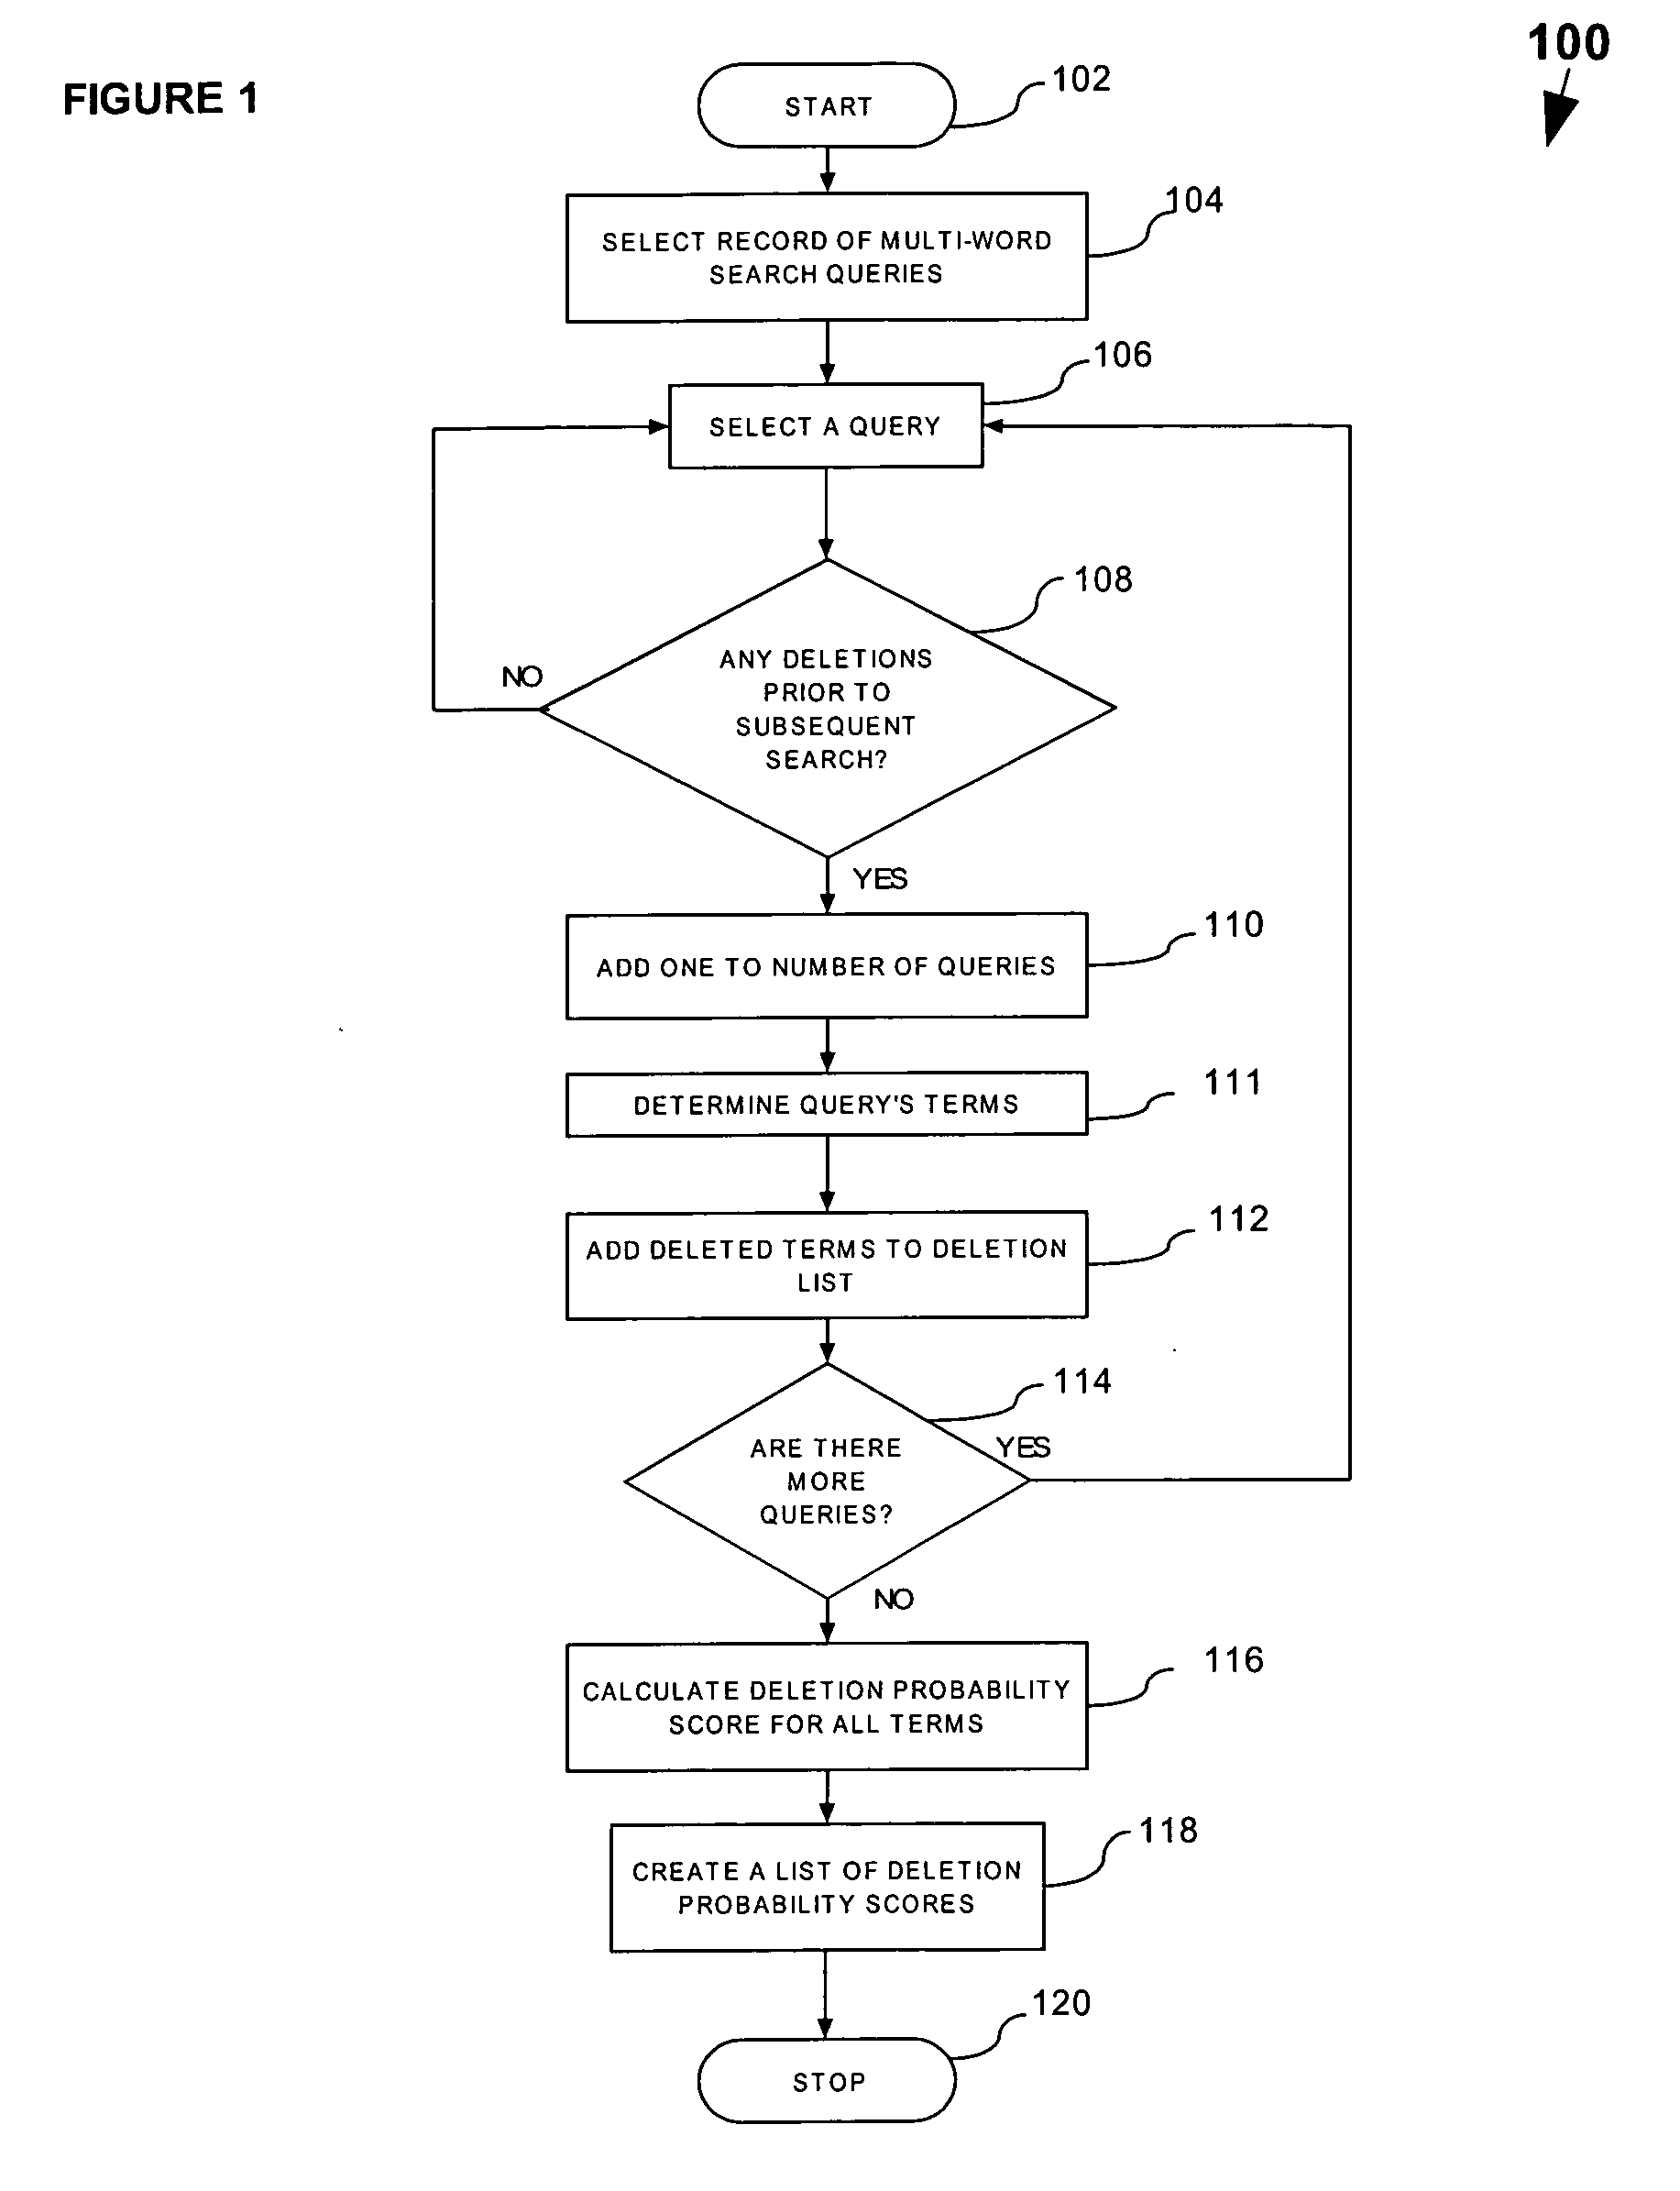 System and methods for ranking the relative value of terms in a multi-term search query using deletion prediction